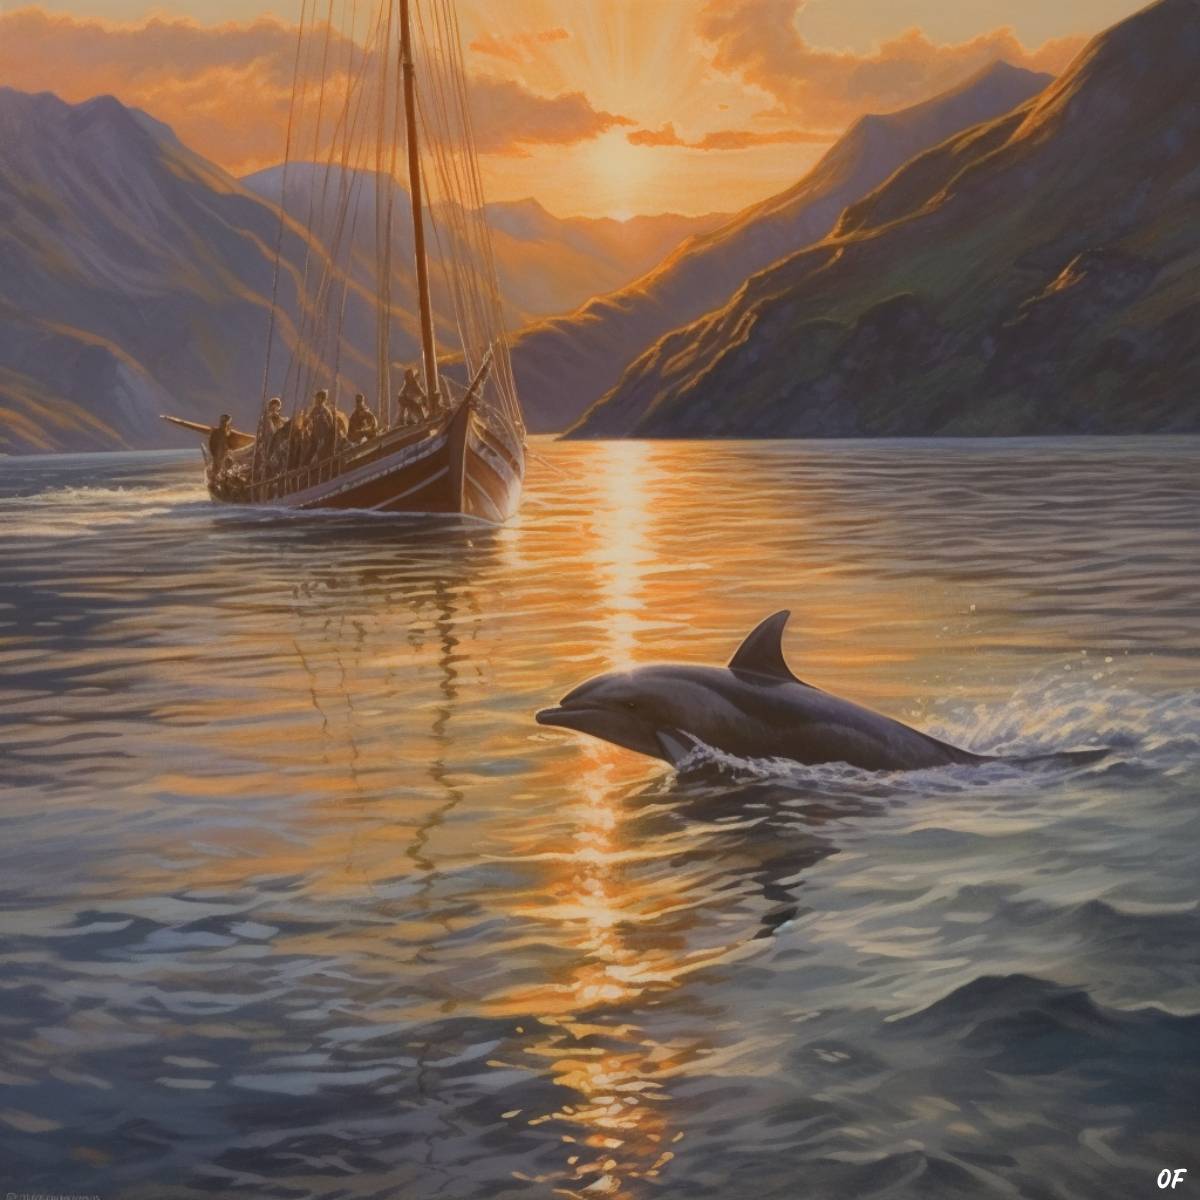 Pelorus Jack, a Risso's dolphin, joyfully guiding ships through the swift currents between D'Urville Island and the mainland amidst the serene beauty of New Zealand's Marlborough Sounds.